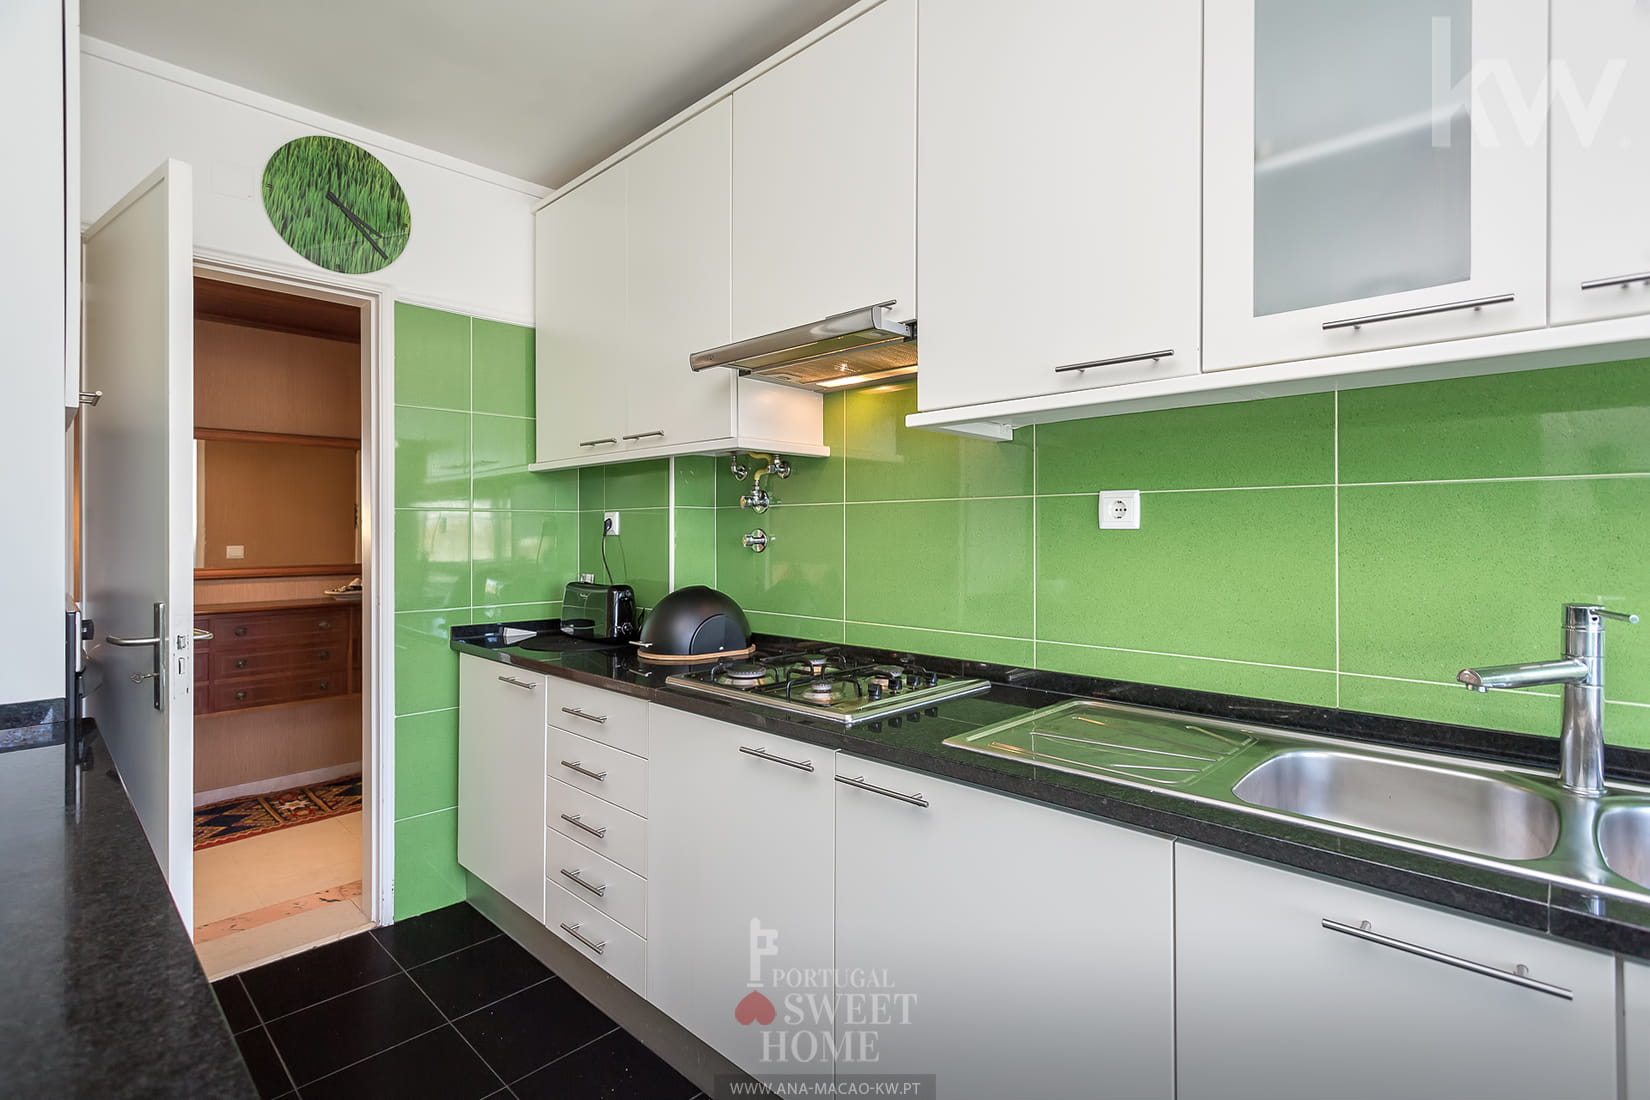 Equipped kitchen (11 m²)